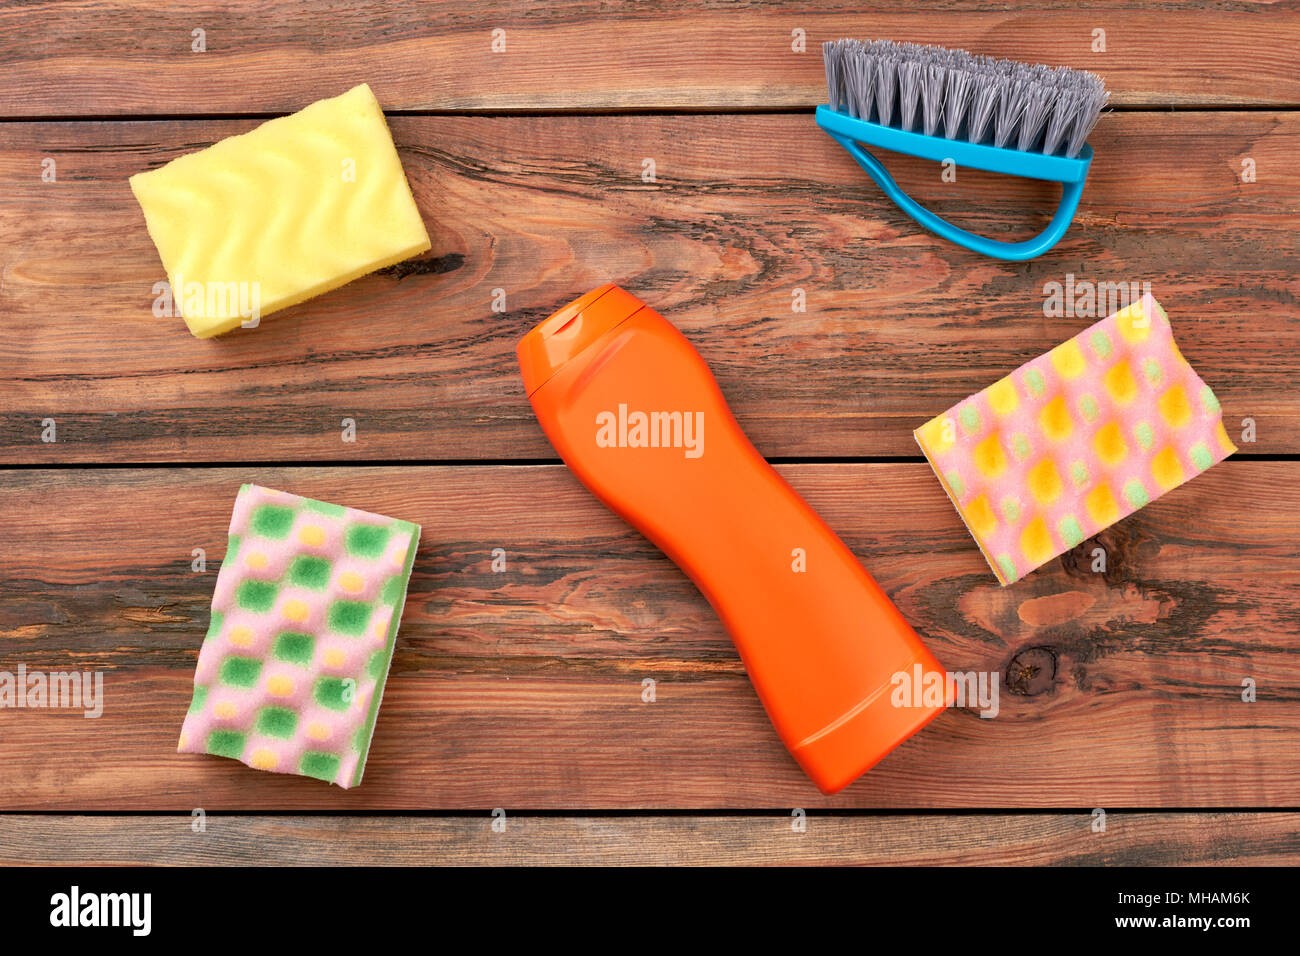 House cleaning products on wooden background. Stock Photo